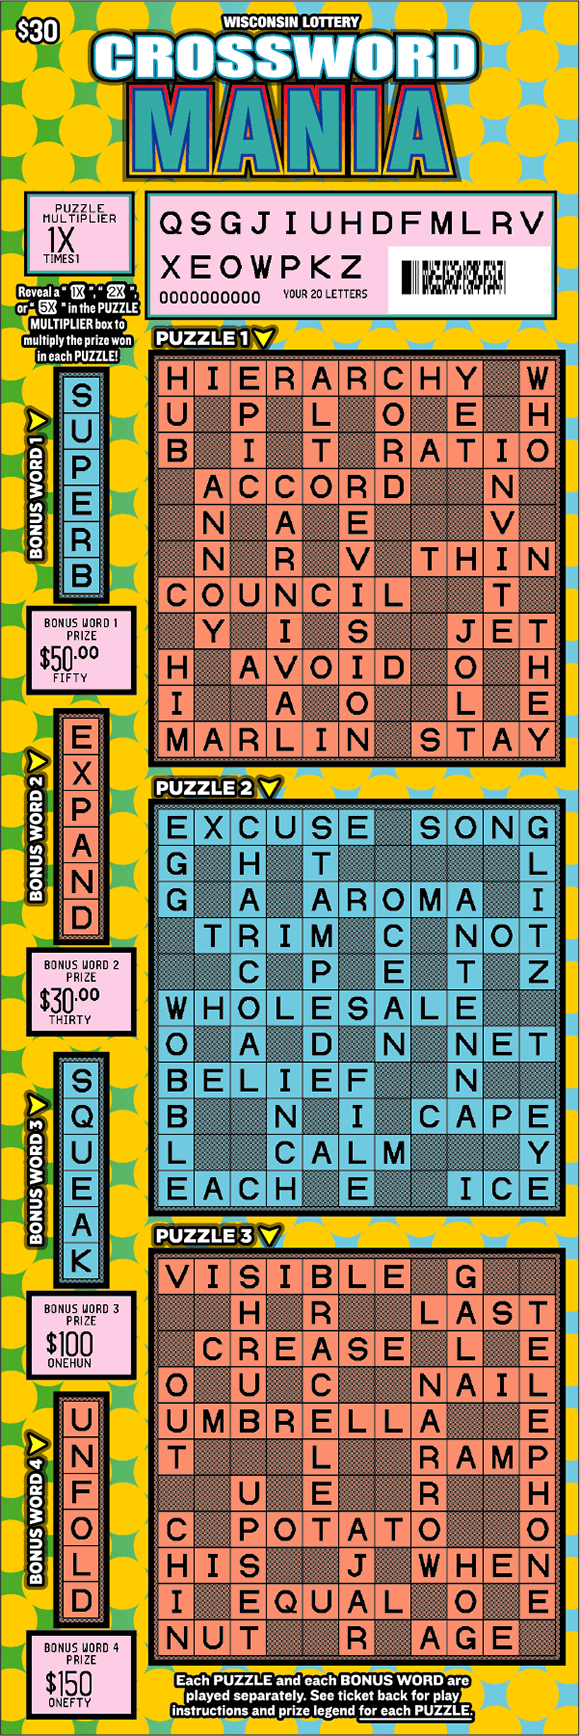 scratched crossword puzzle play area with yellow dots on light blue background with white and blue block lettering outlined in black on scratch game 